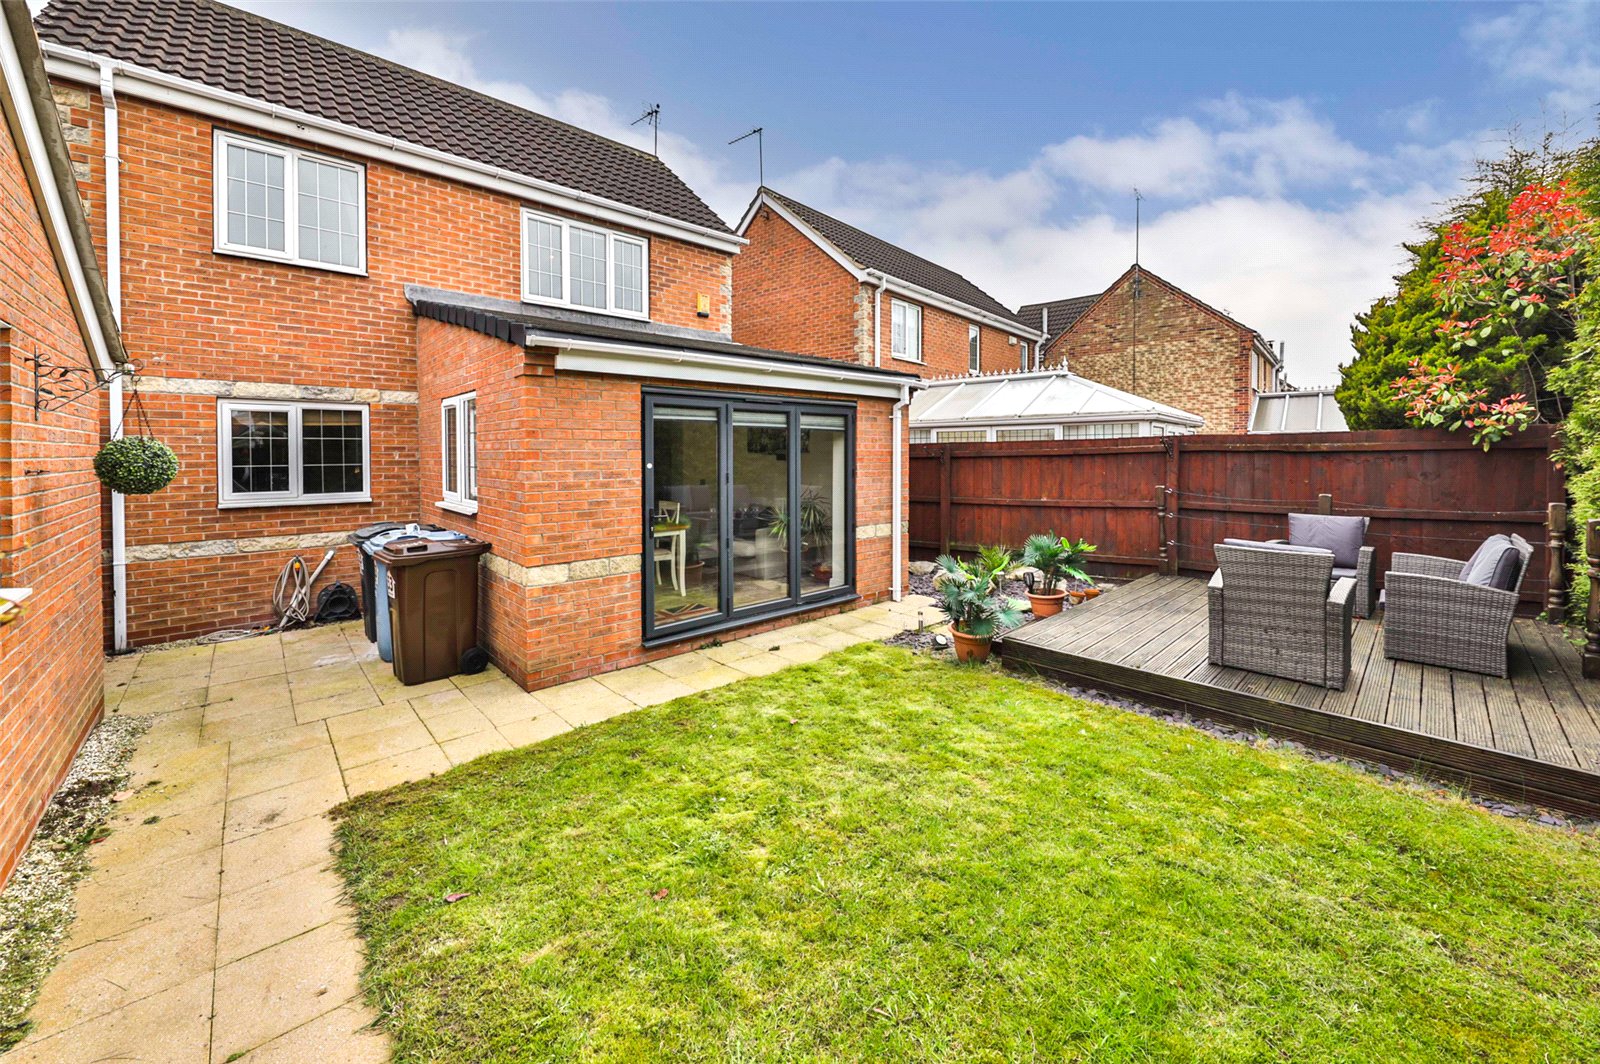 3 bed house for sale in Santolina Way, Hull 8